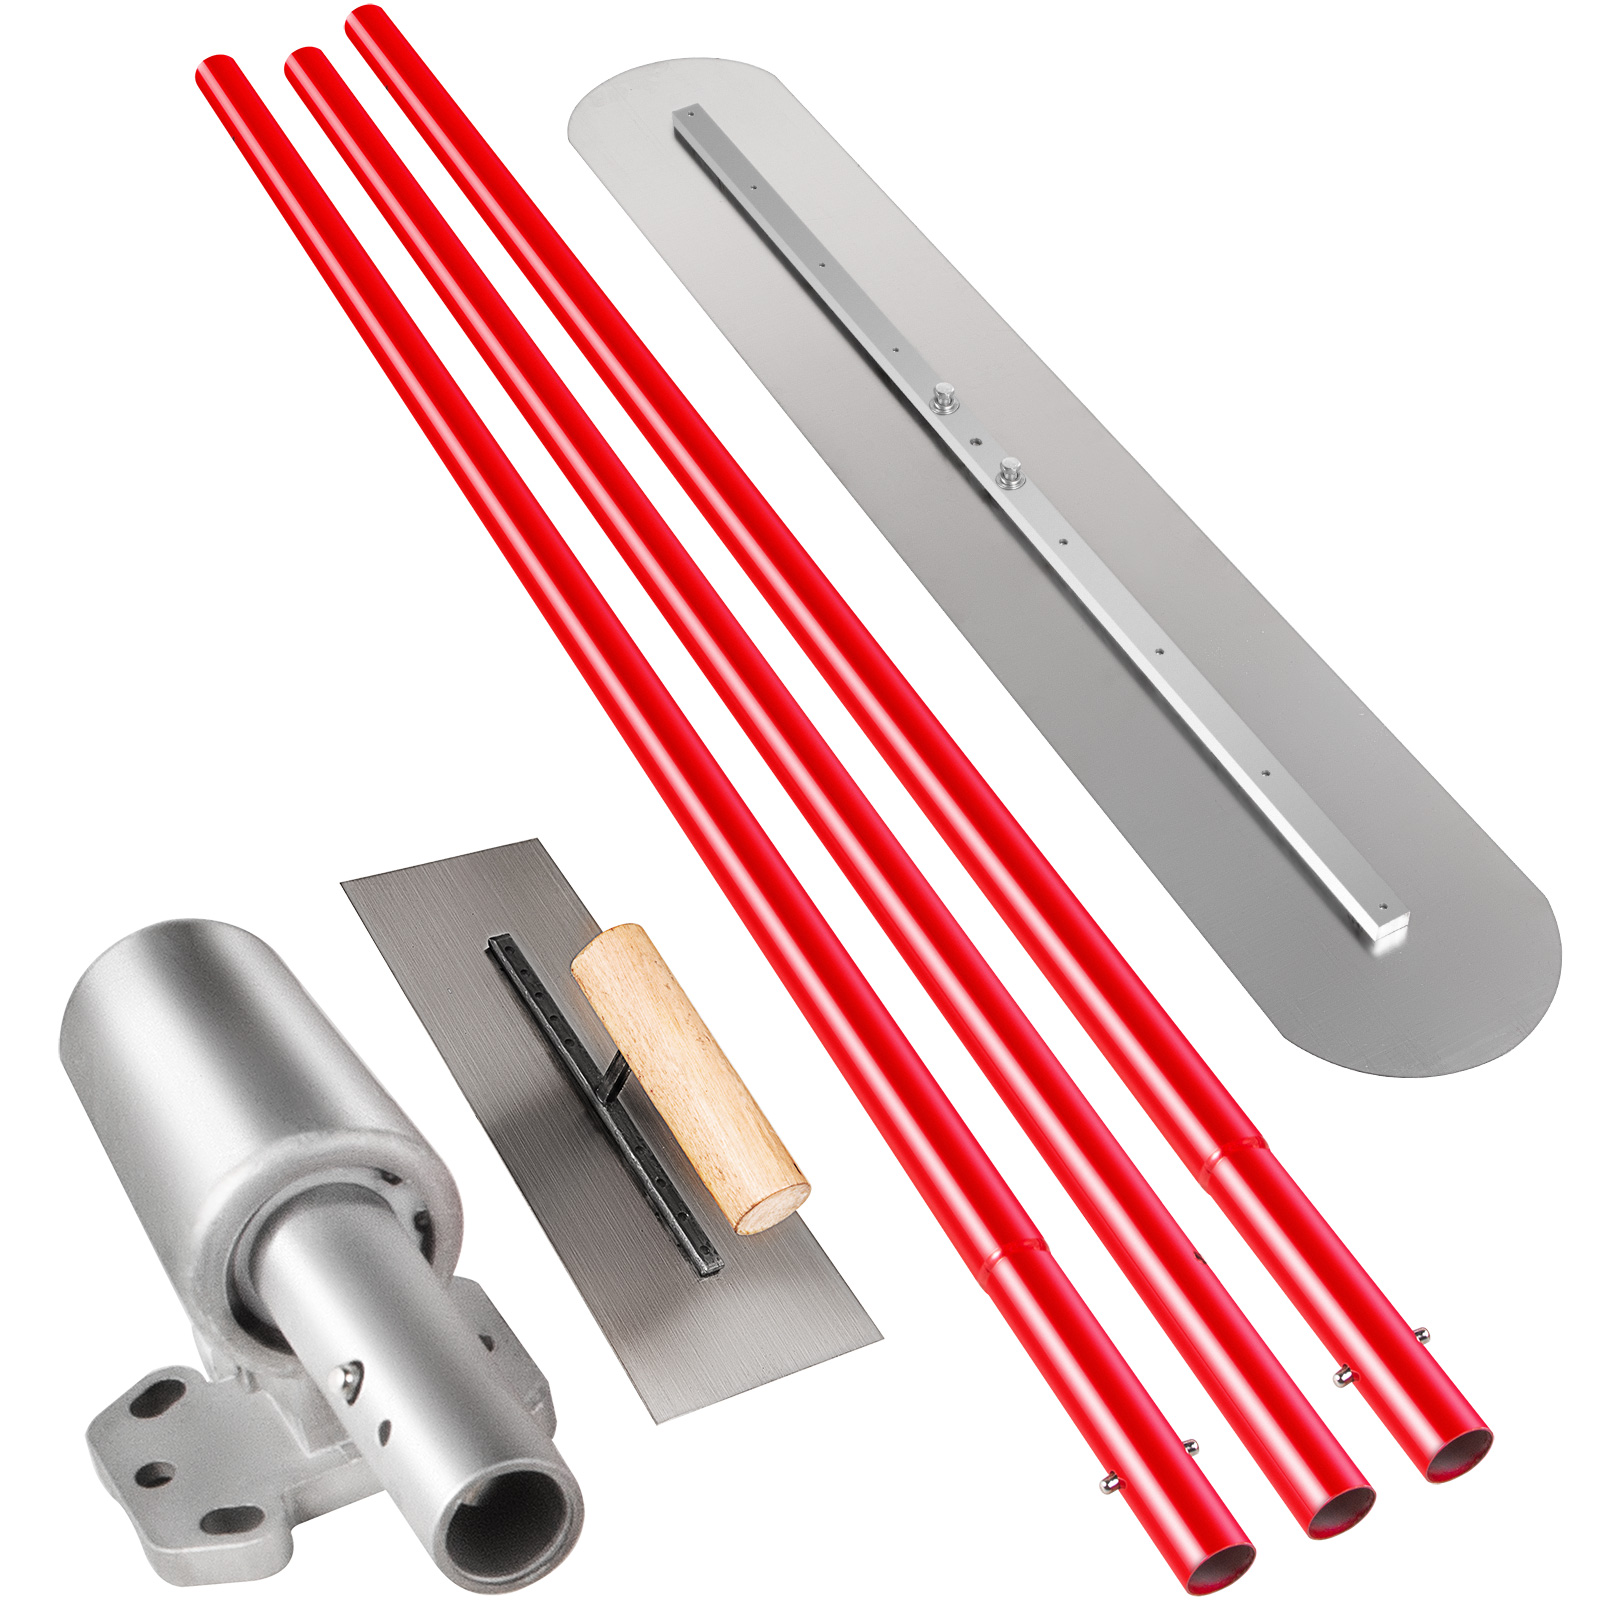 Kit Metal T-Bar Slide Clamp for Drop Ceilings, Aluminum Hanging Fork Clear  Anodized Finish and Stainless Steel Cable